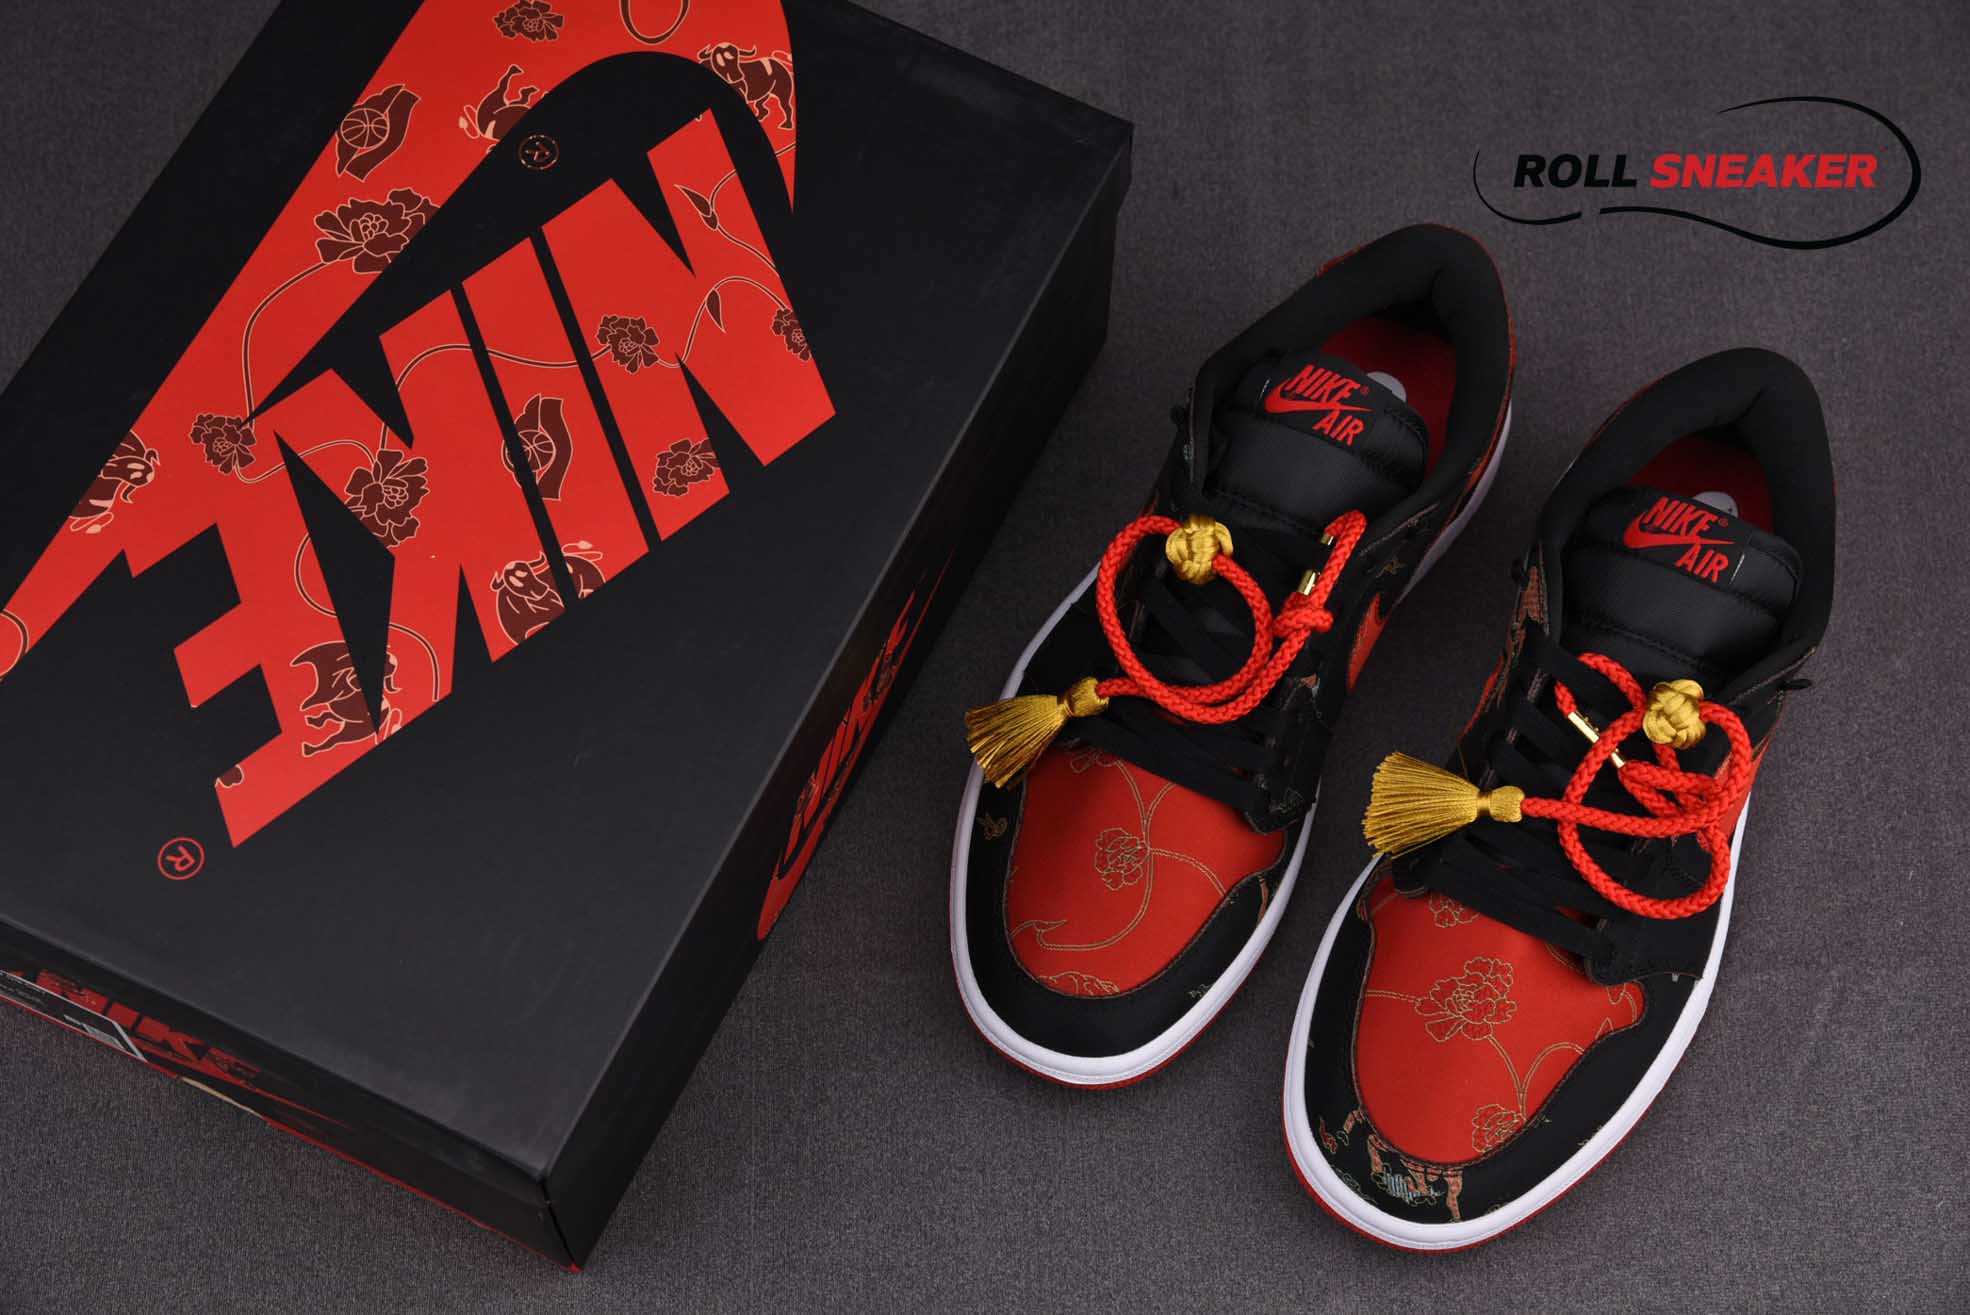 Nike Air Jordan 1 Low OG “Chinese New Year” Limited